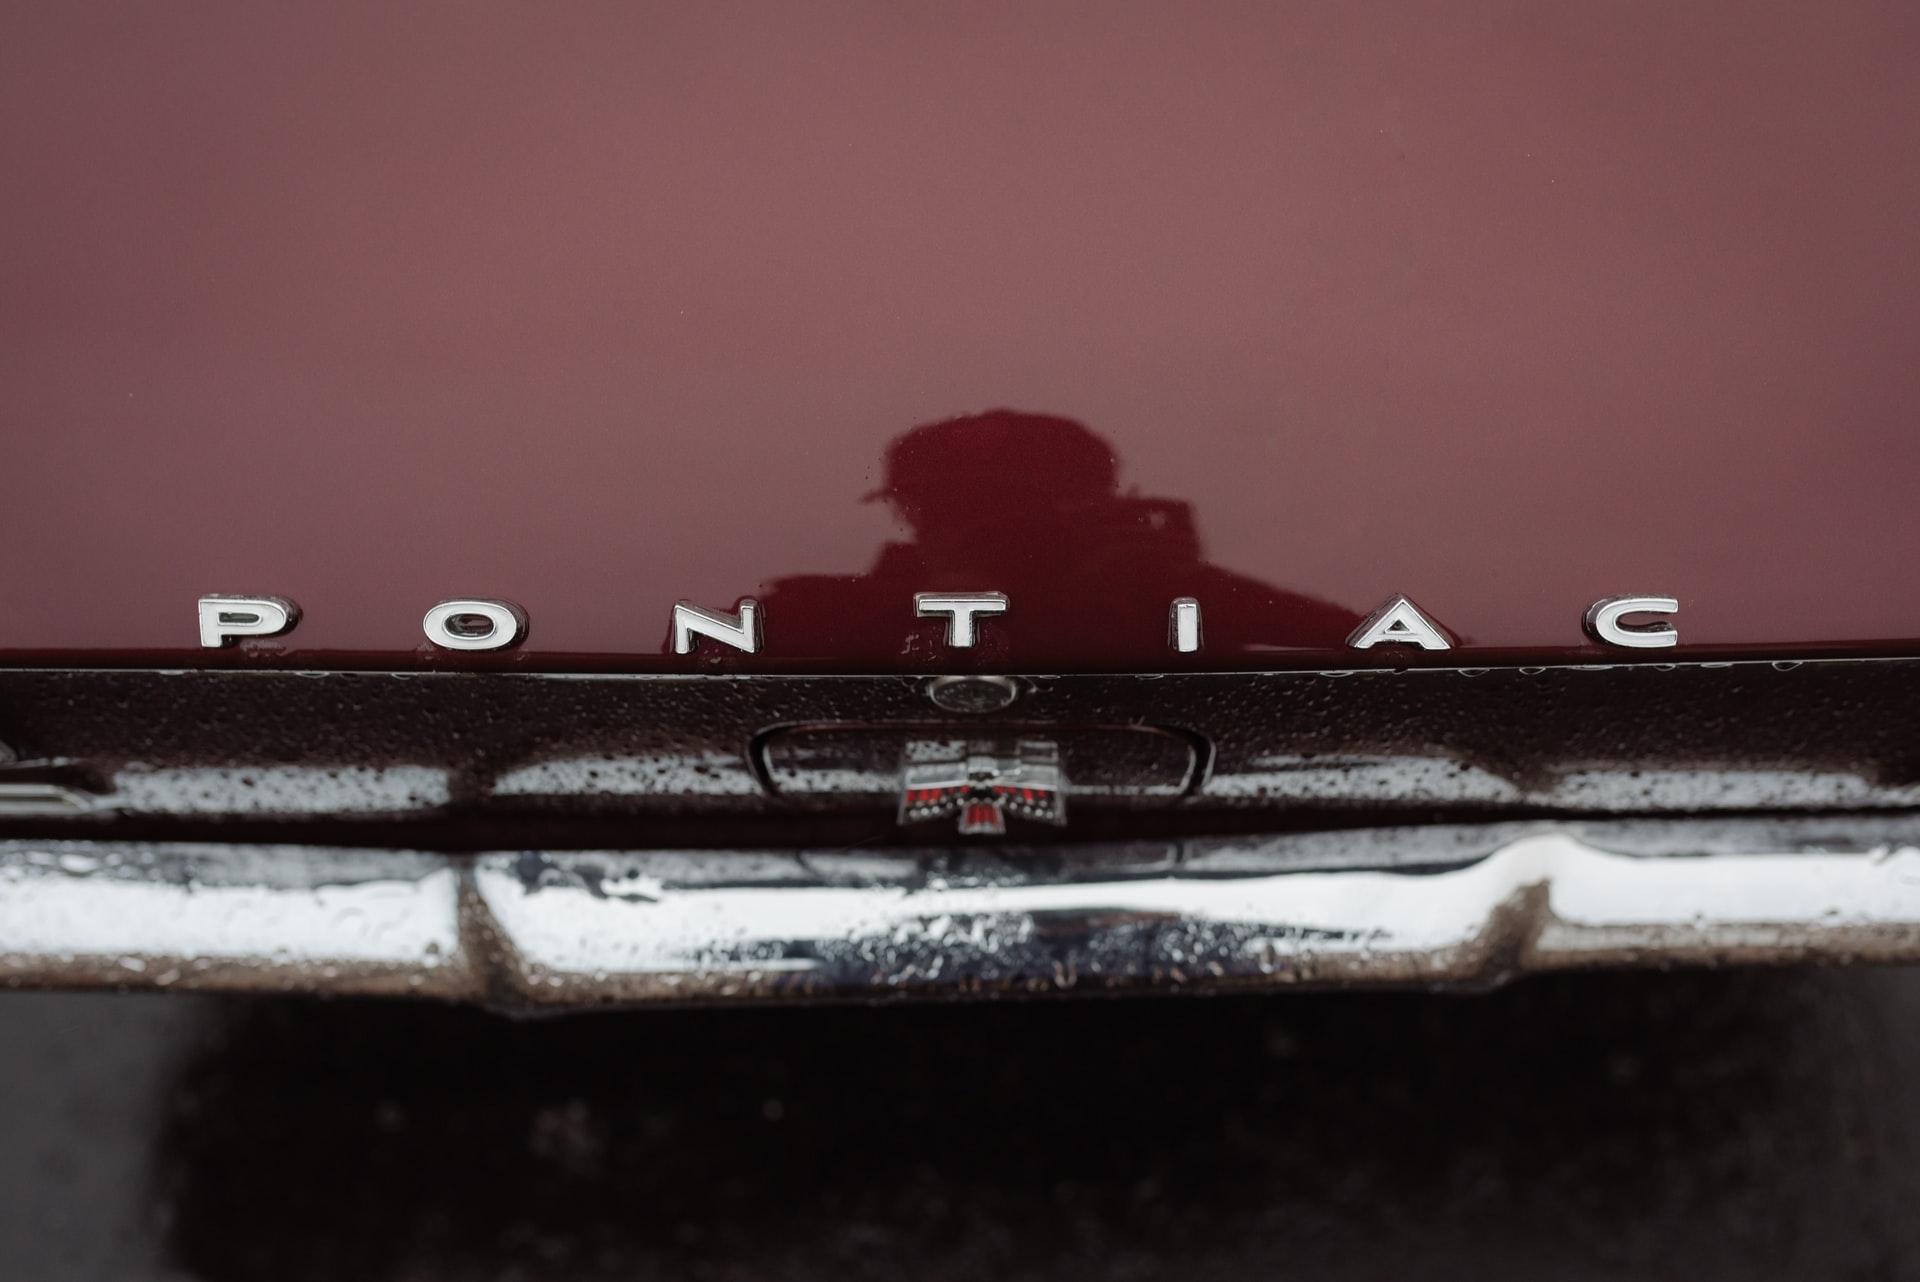 Burgundy Pontiac hood with silver nameplate viewed from above